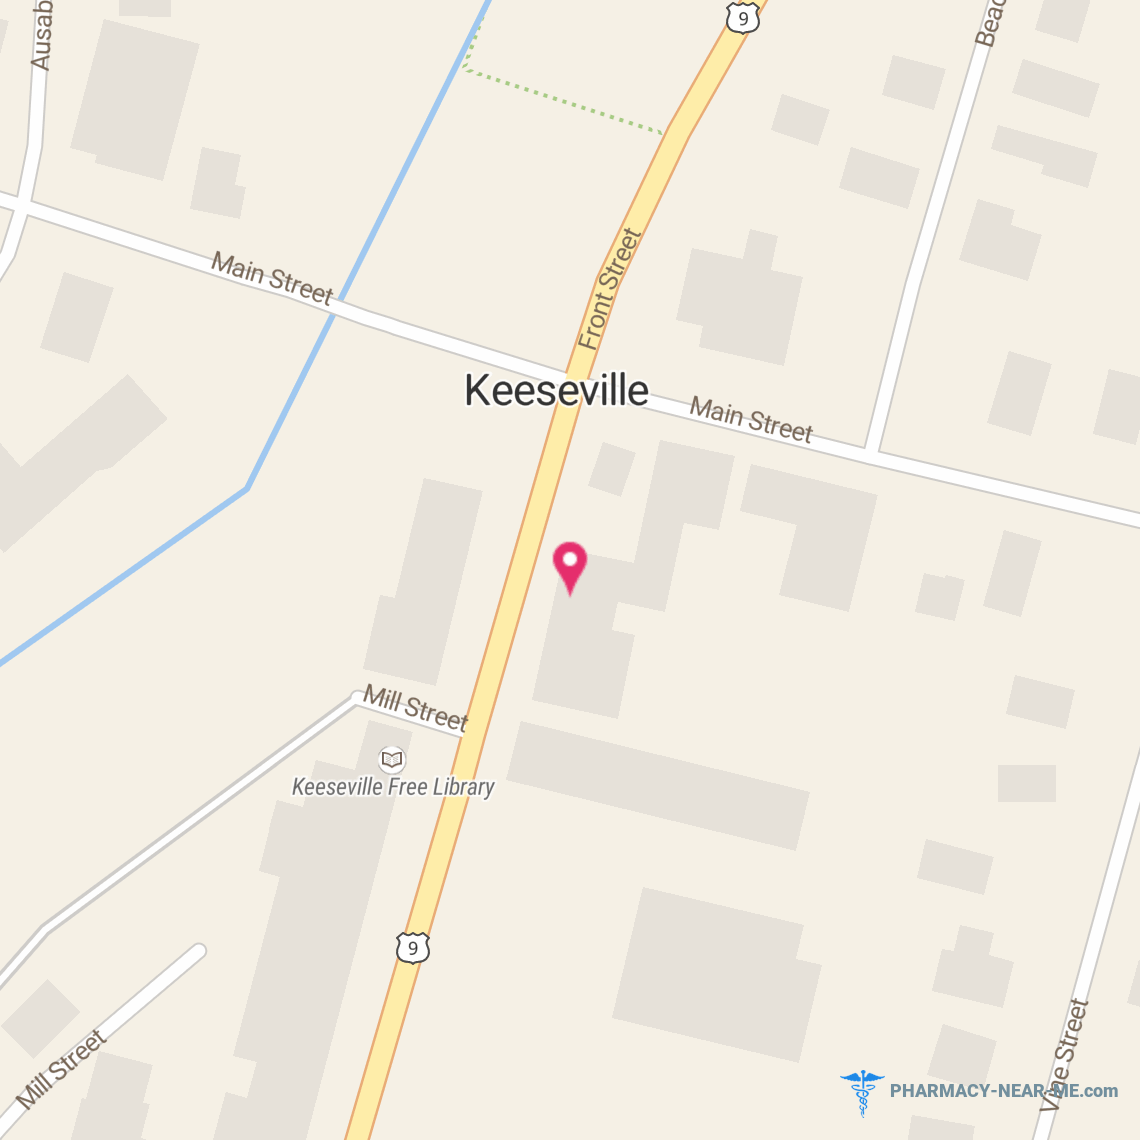 KEESEVILLE PHARMACY INC - Pharmacy Hours, Phone, Reviews & Information: 1730 Front Street, Keeseville, New York 12944, United States